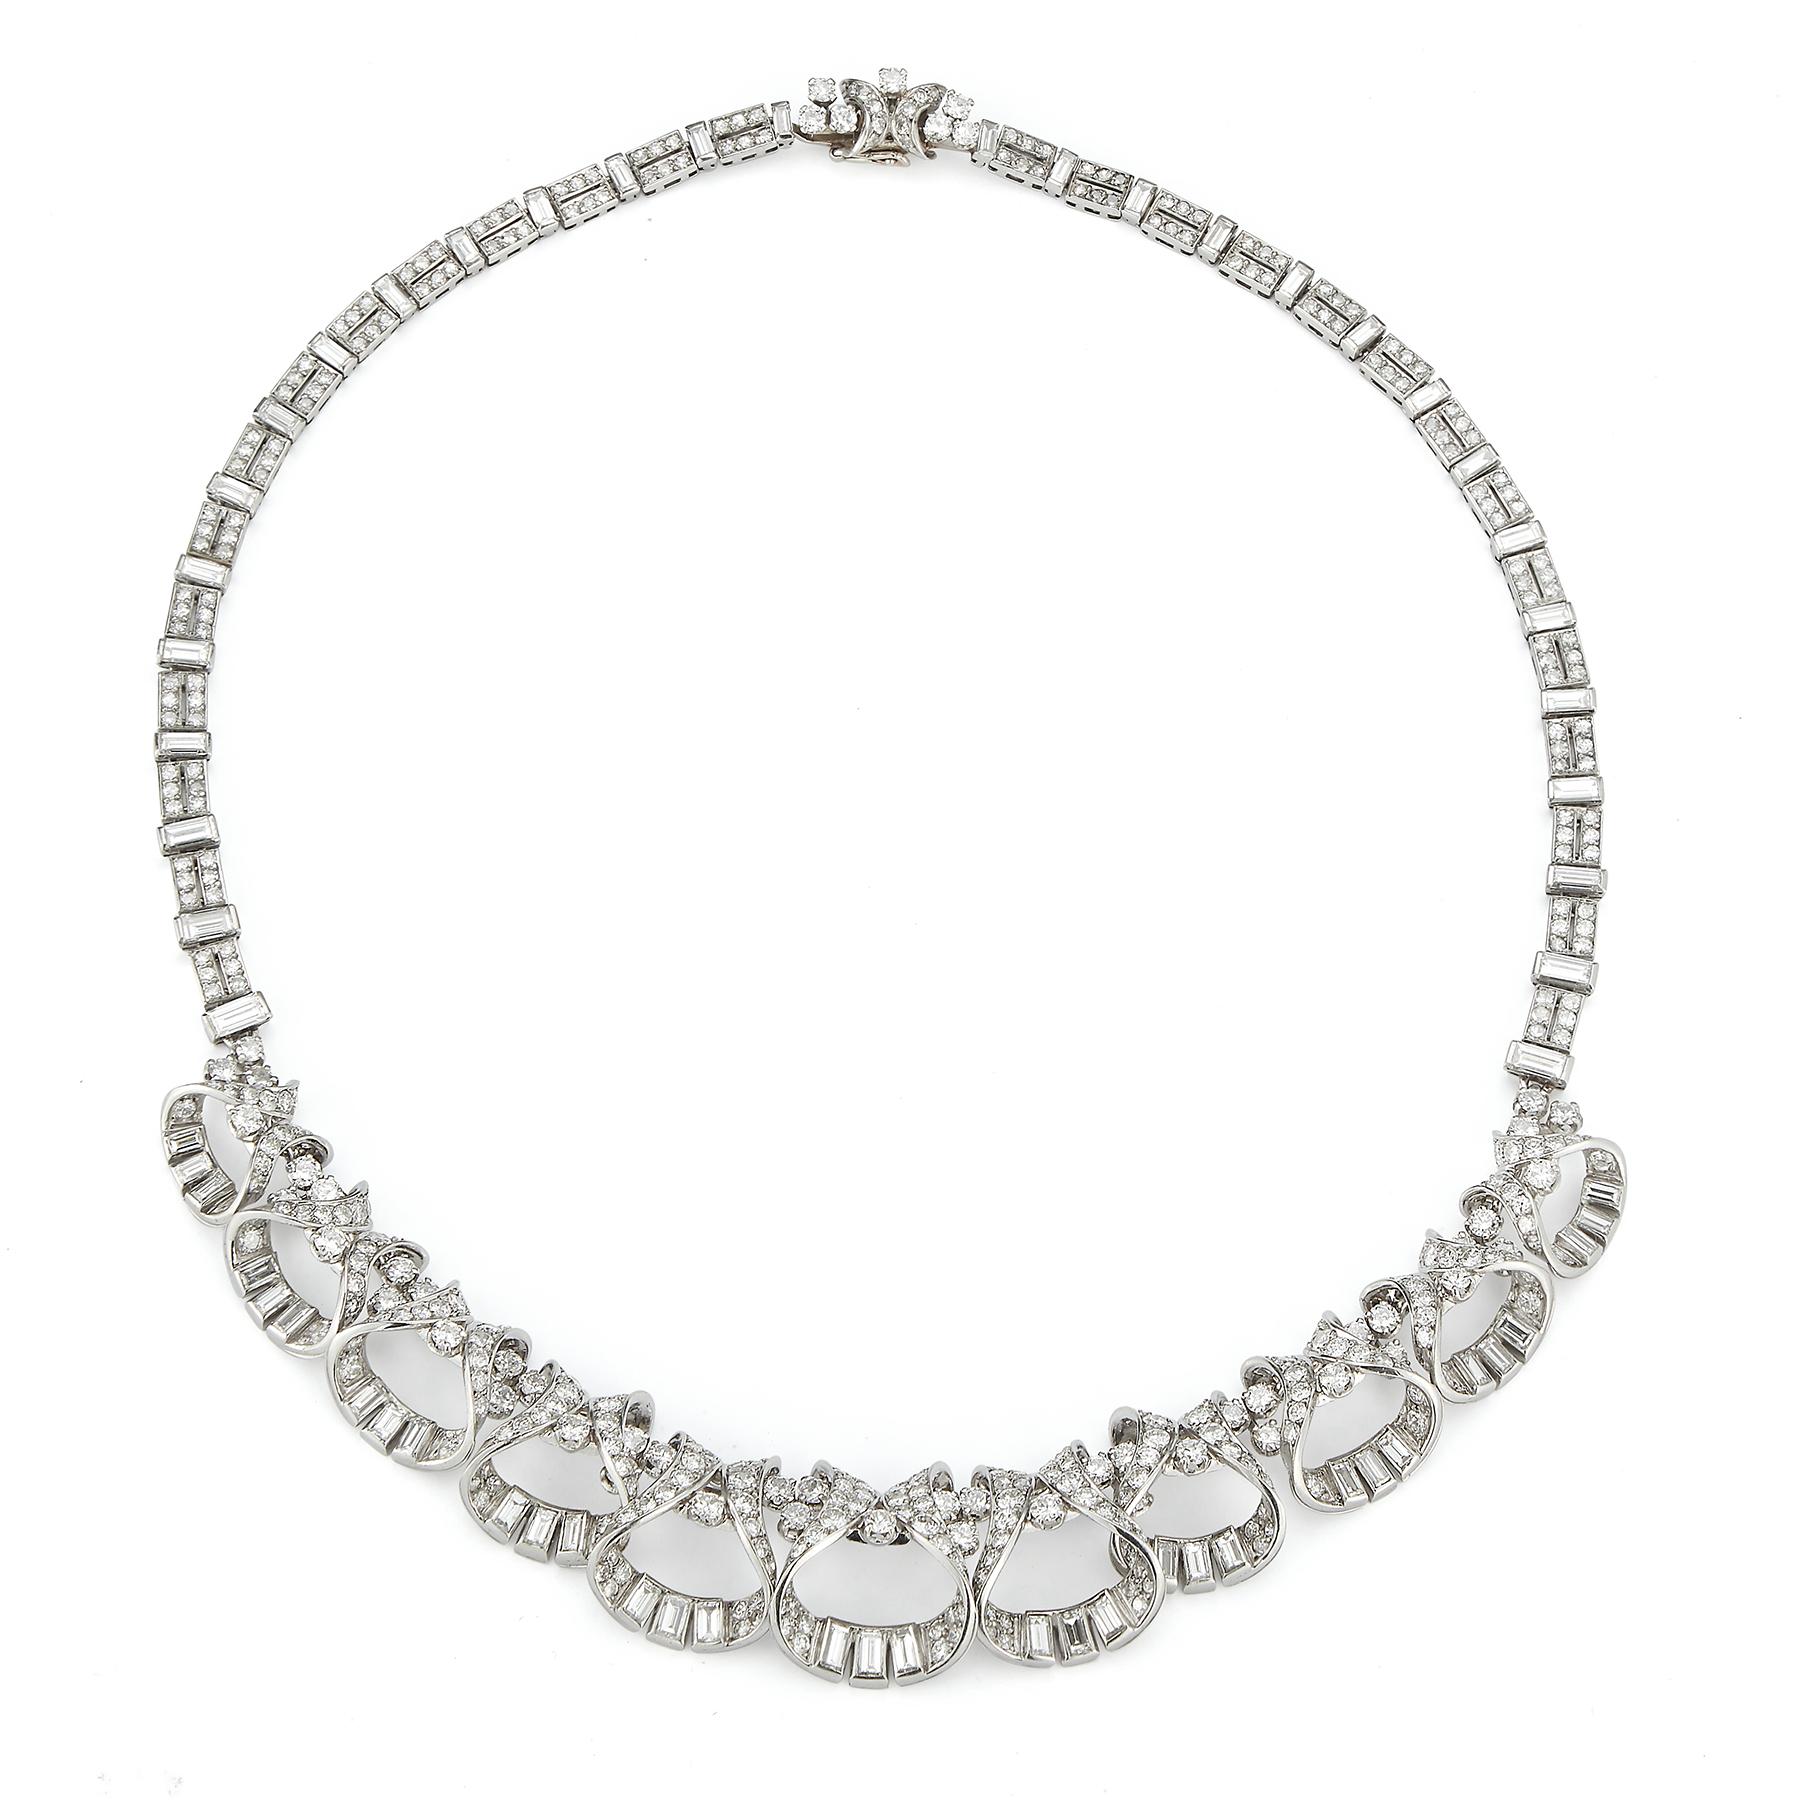 French Art Deco Diamond Necklace

Approximately 24 carats total diamond weight

Round & baguette cut diamonds
396 small round cut diamonds ,53 larger round cut diamonds & 63 baguette cut diamonds set in platinum

Made Circa 1920

Measurements: 16